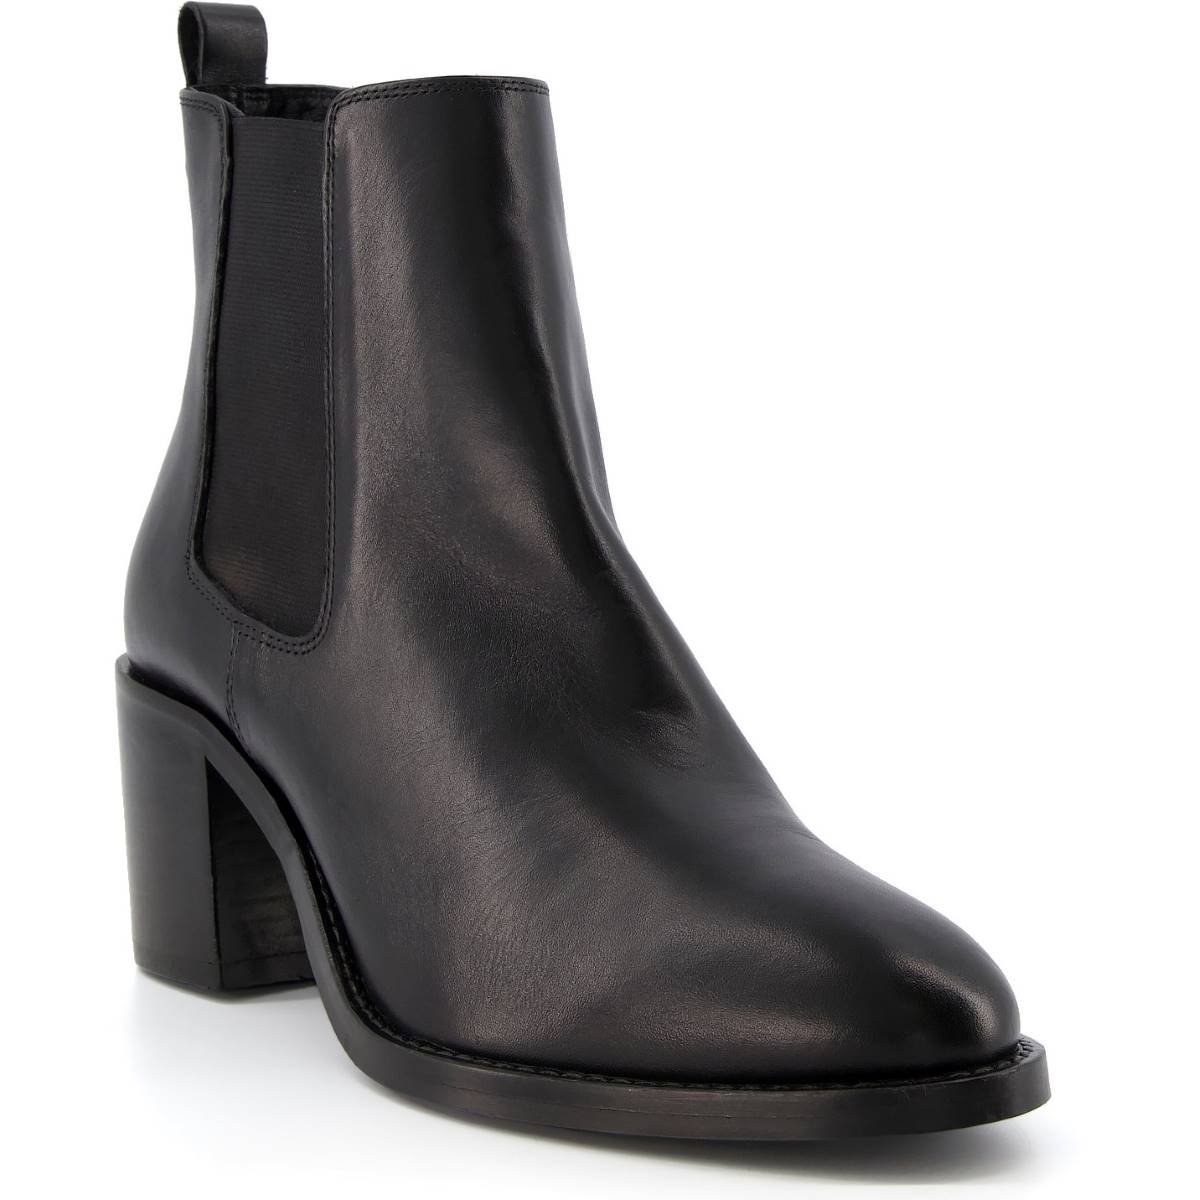 Dune London Pembly Black Womens ankle boots 92506690041484 in a Plain Leather in Size 7